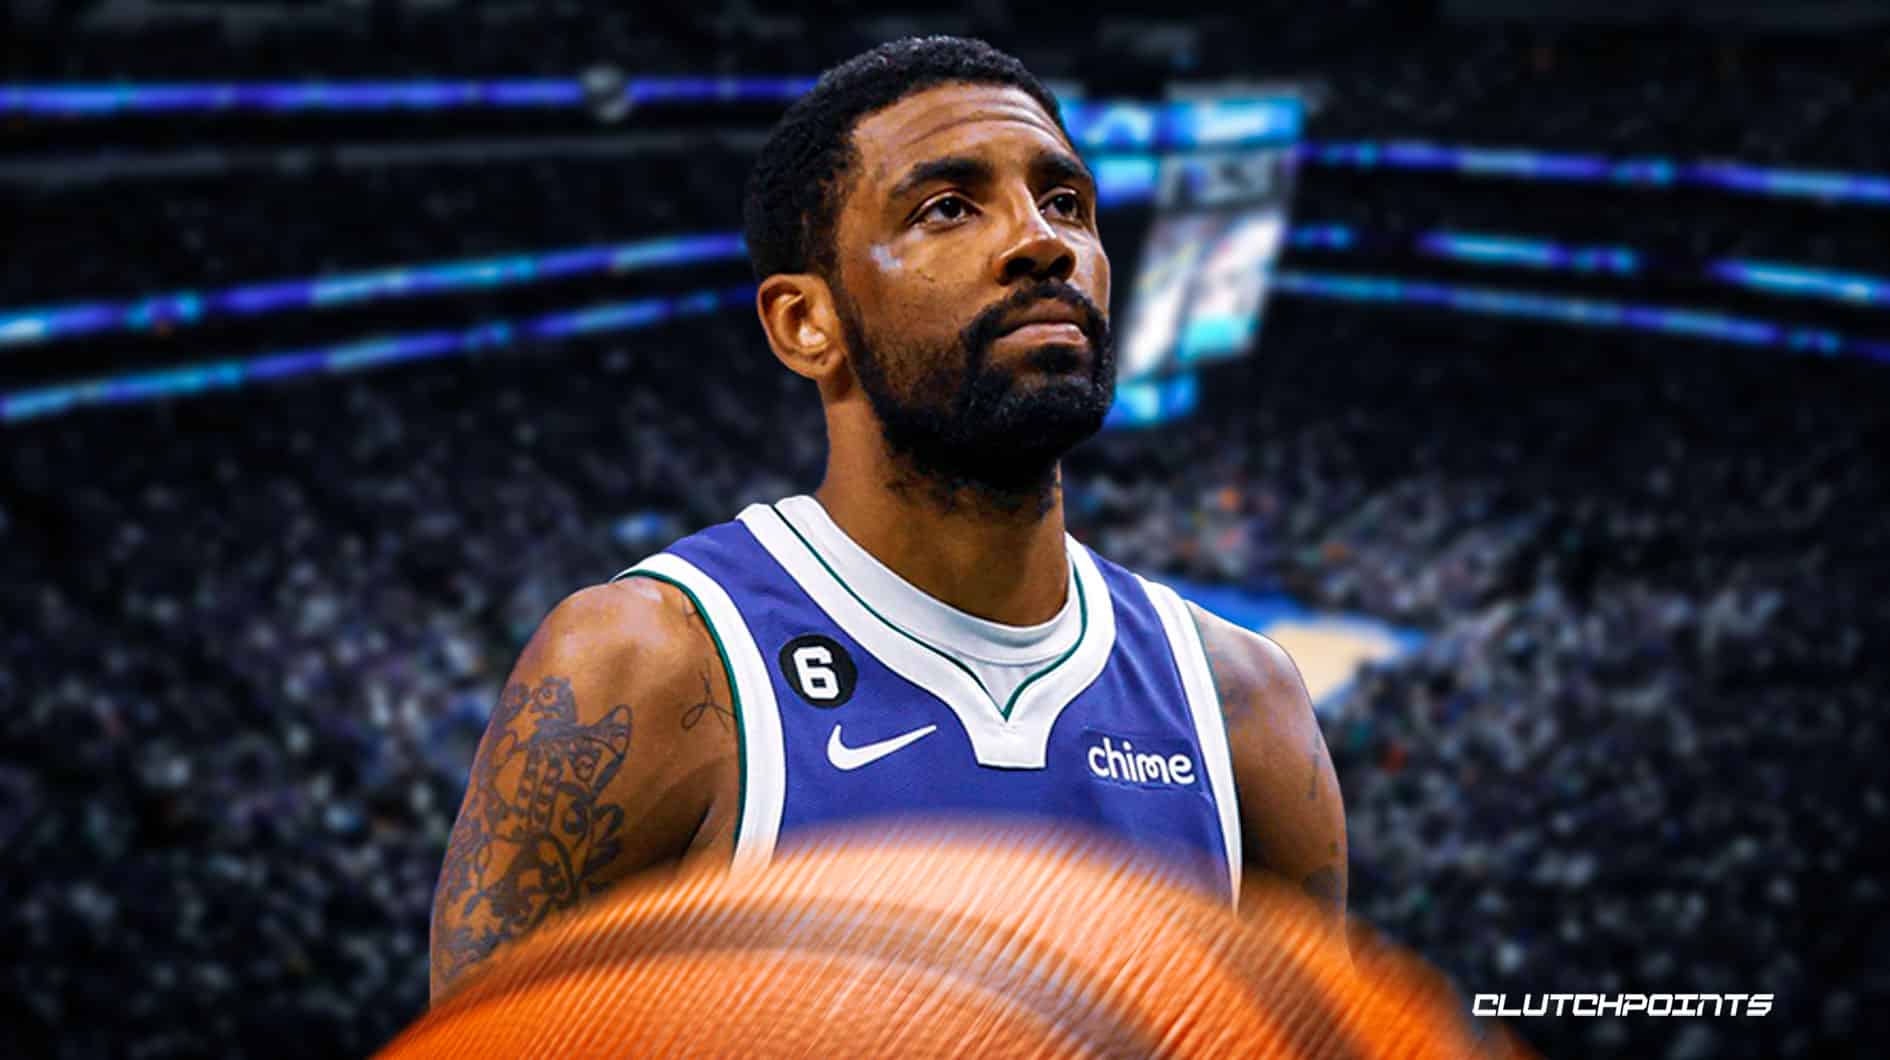 kyrie irving, mavs, nba rumors, kyrie irving number, kyrie irving free agency